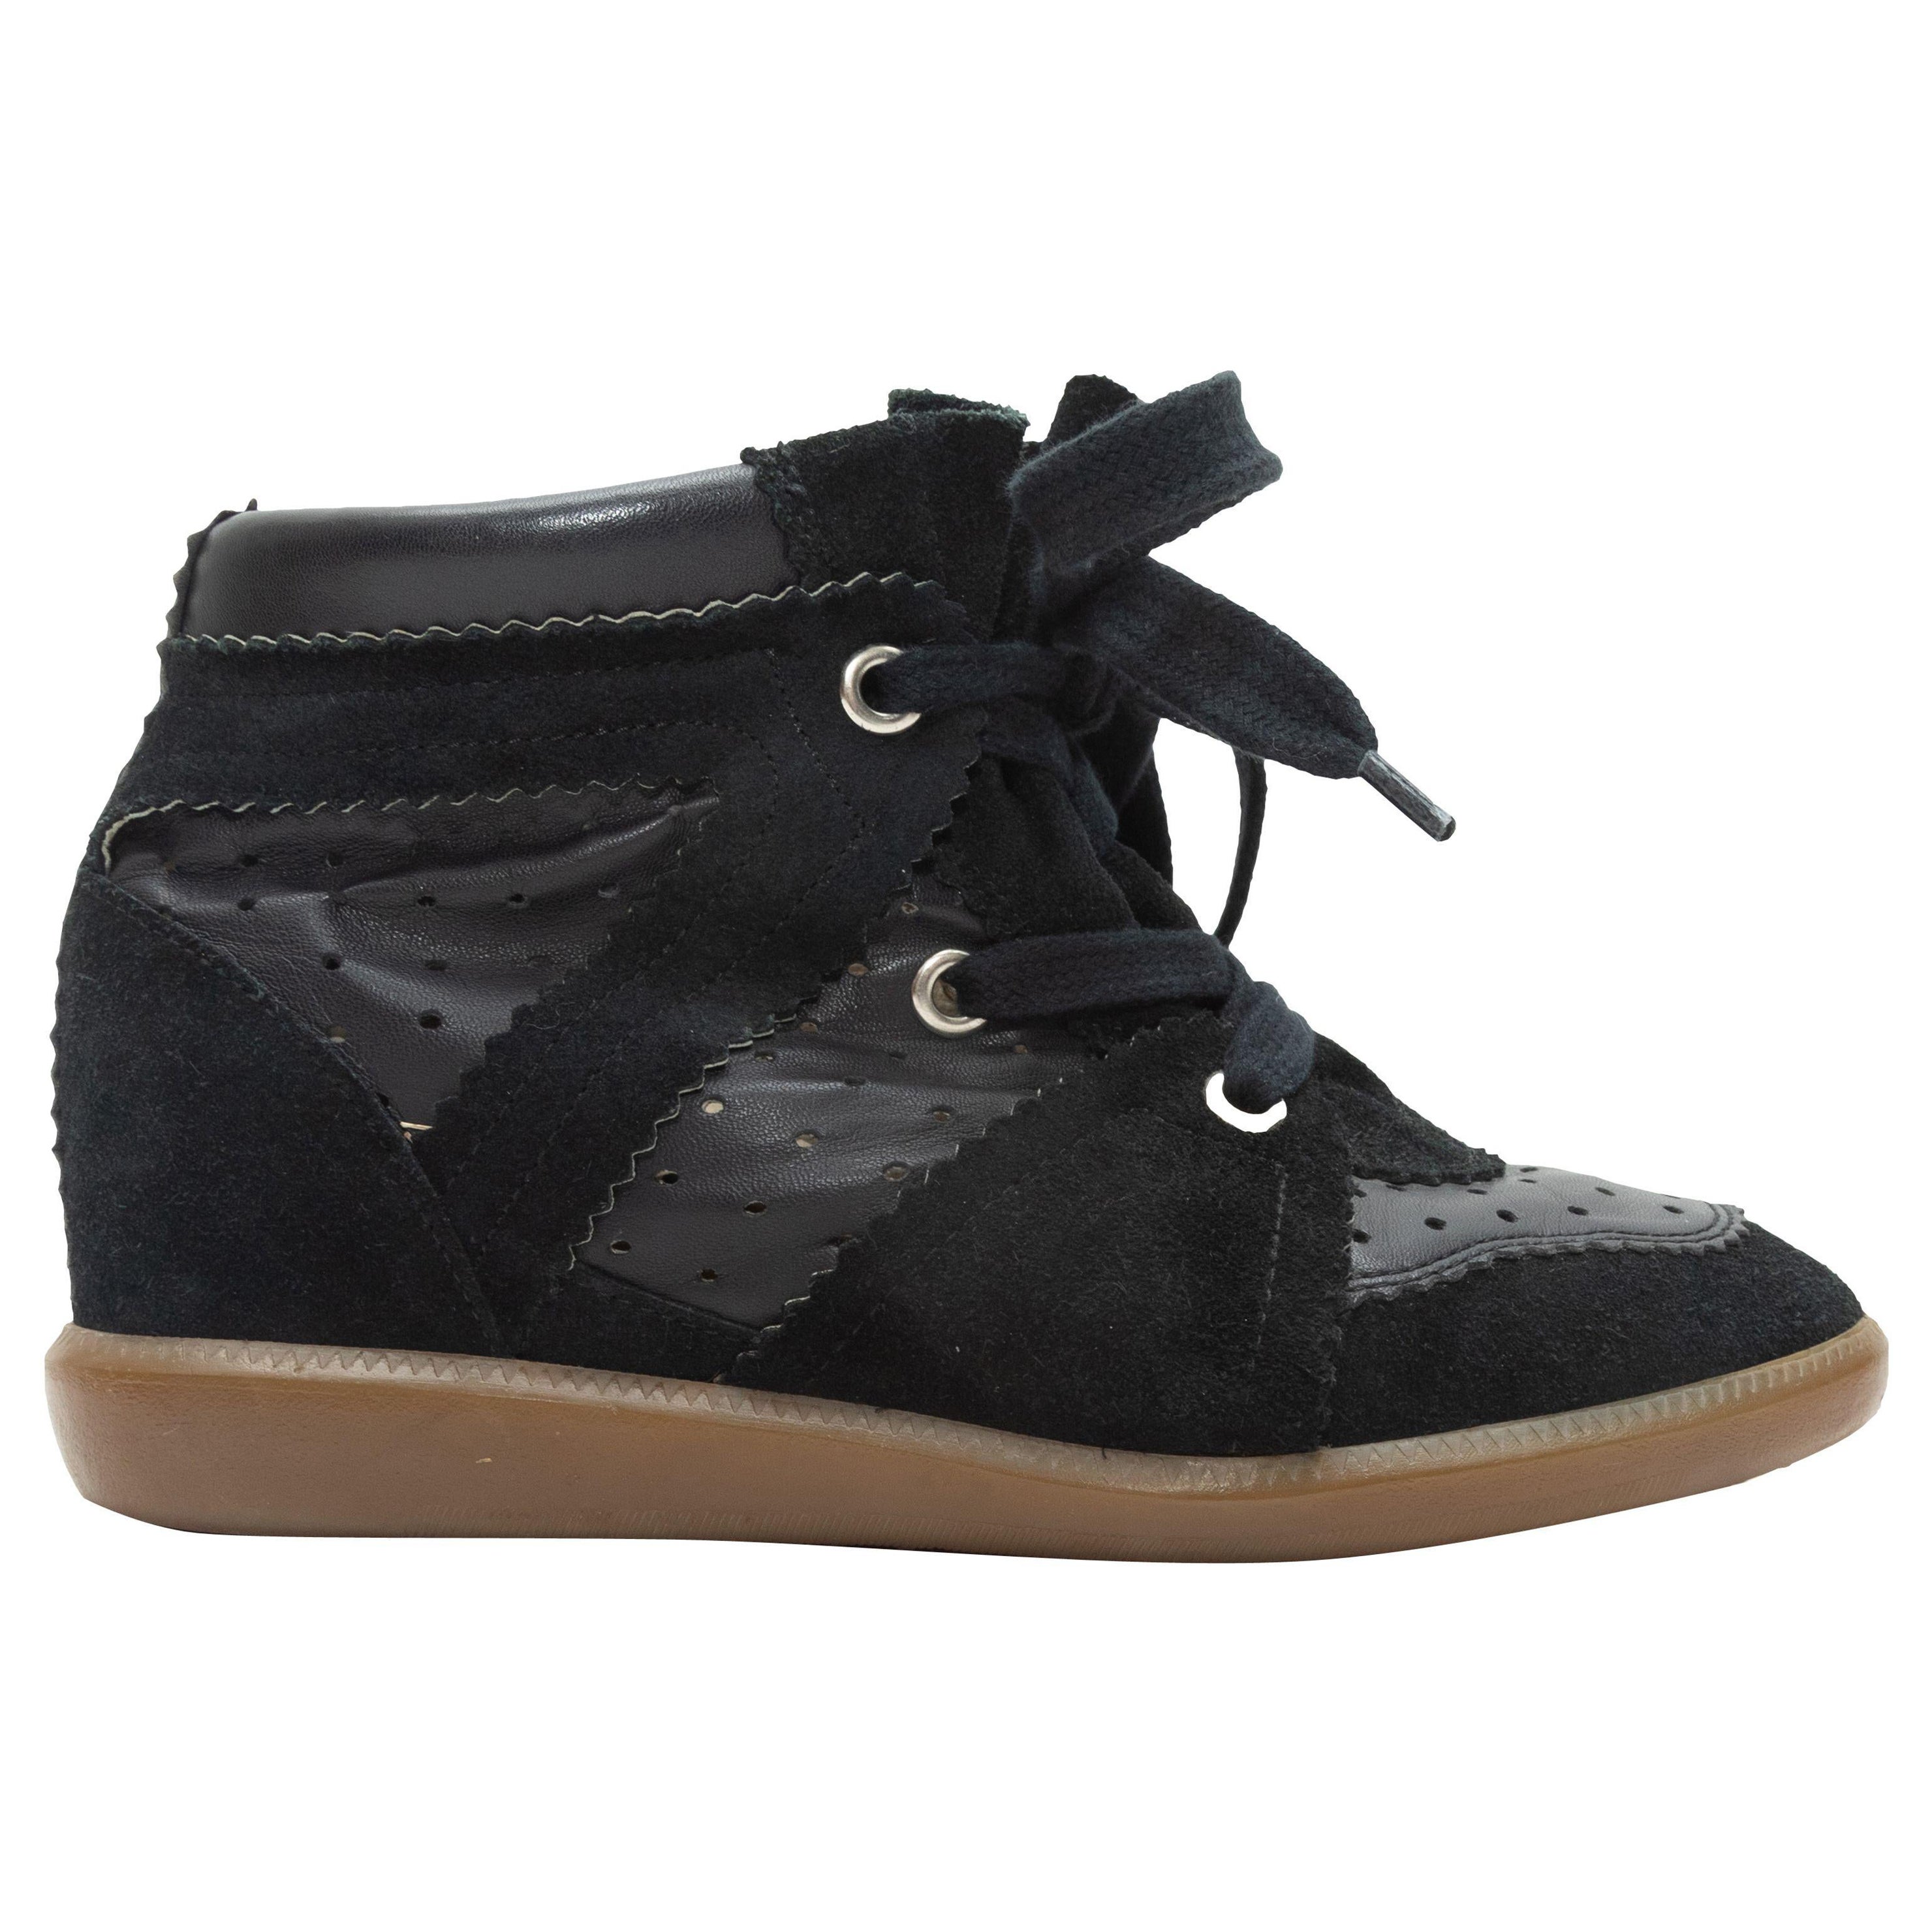 Isabel Marant Black Suede & Leather Wedge Sneakers For Sale